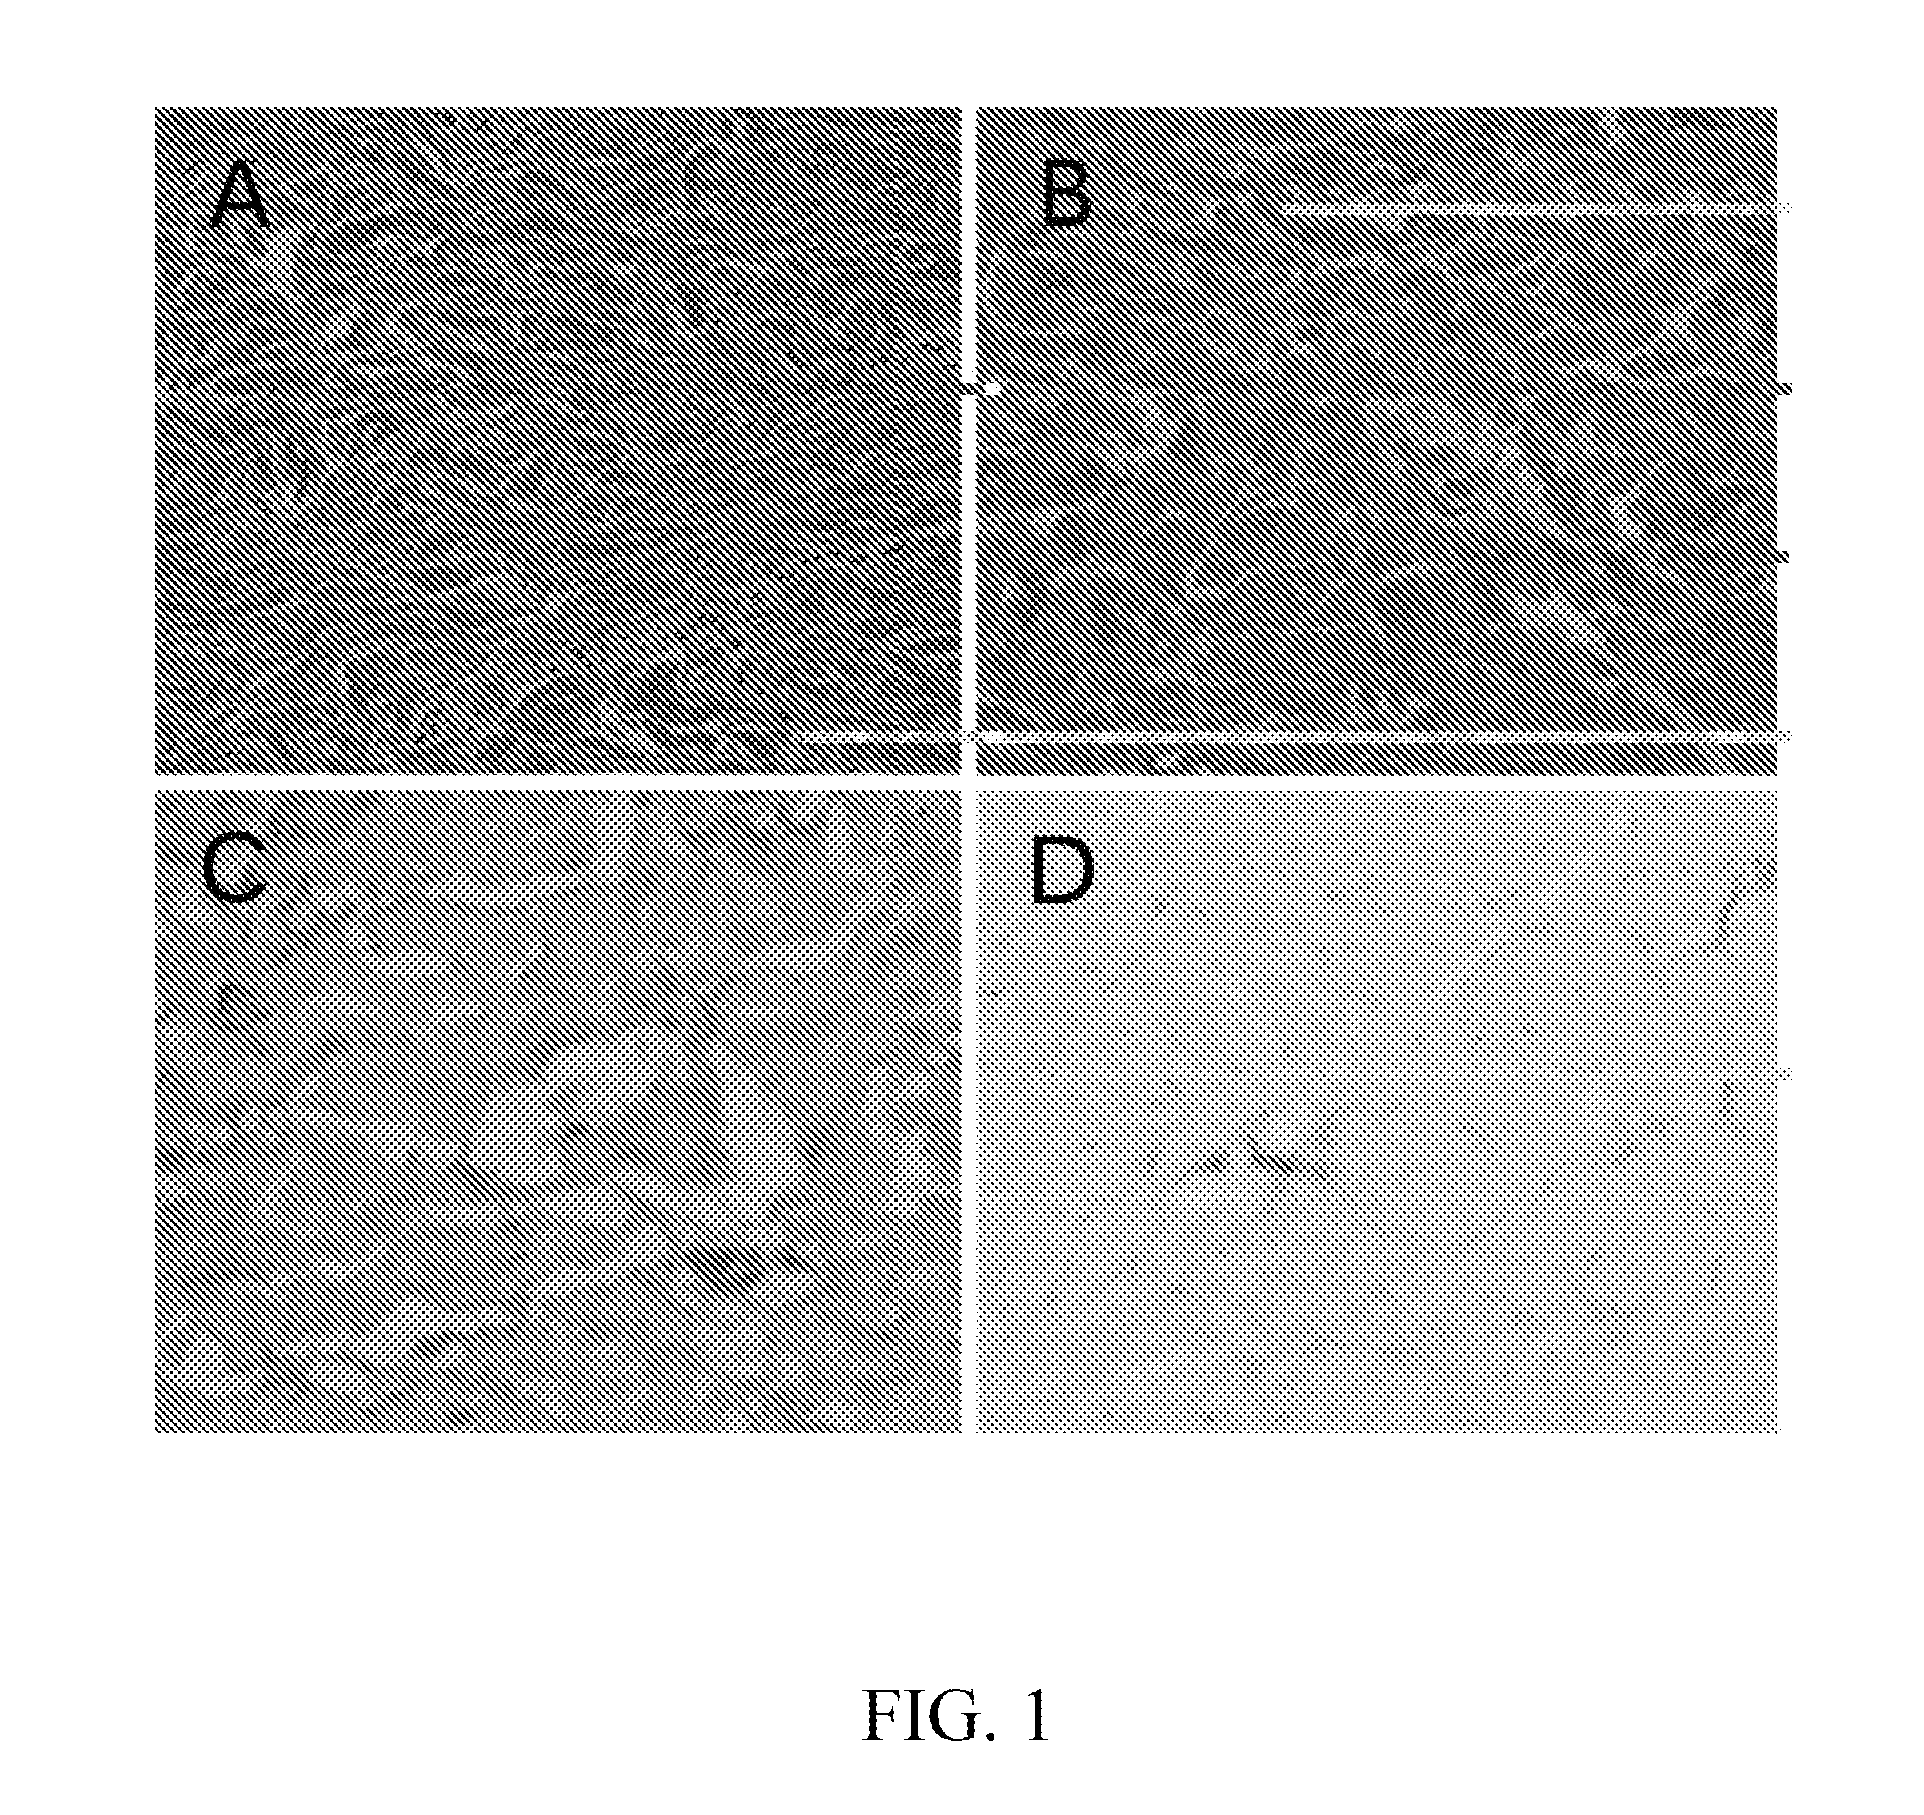 Method for preparing an animal decellularized tissue matrix material and a decellularized tissue matrix material prepared thereby